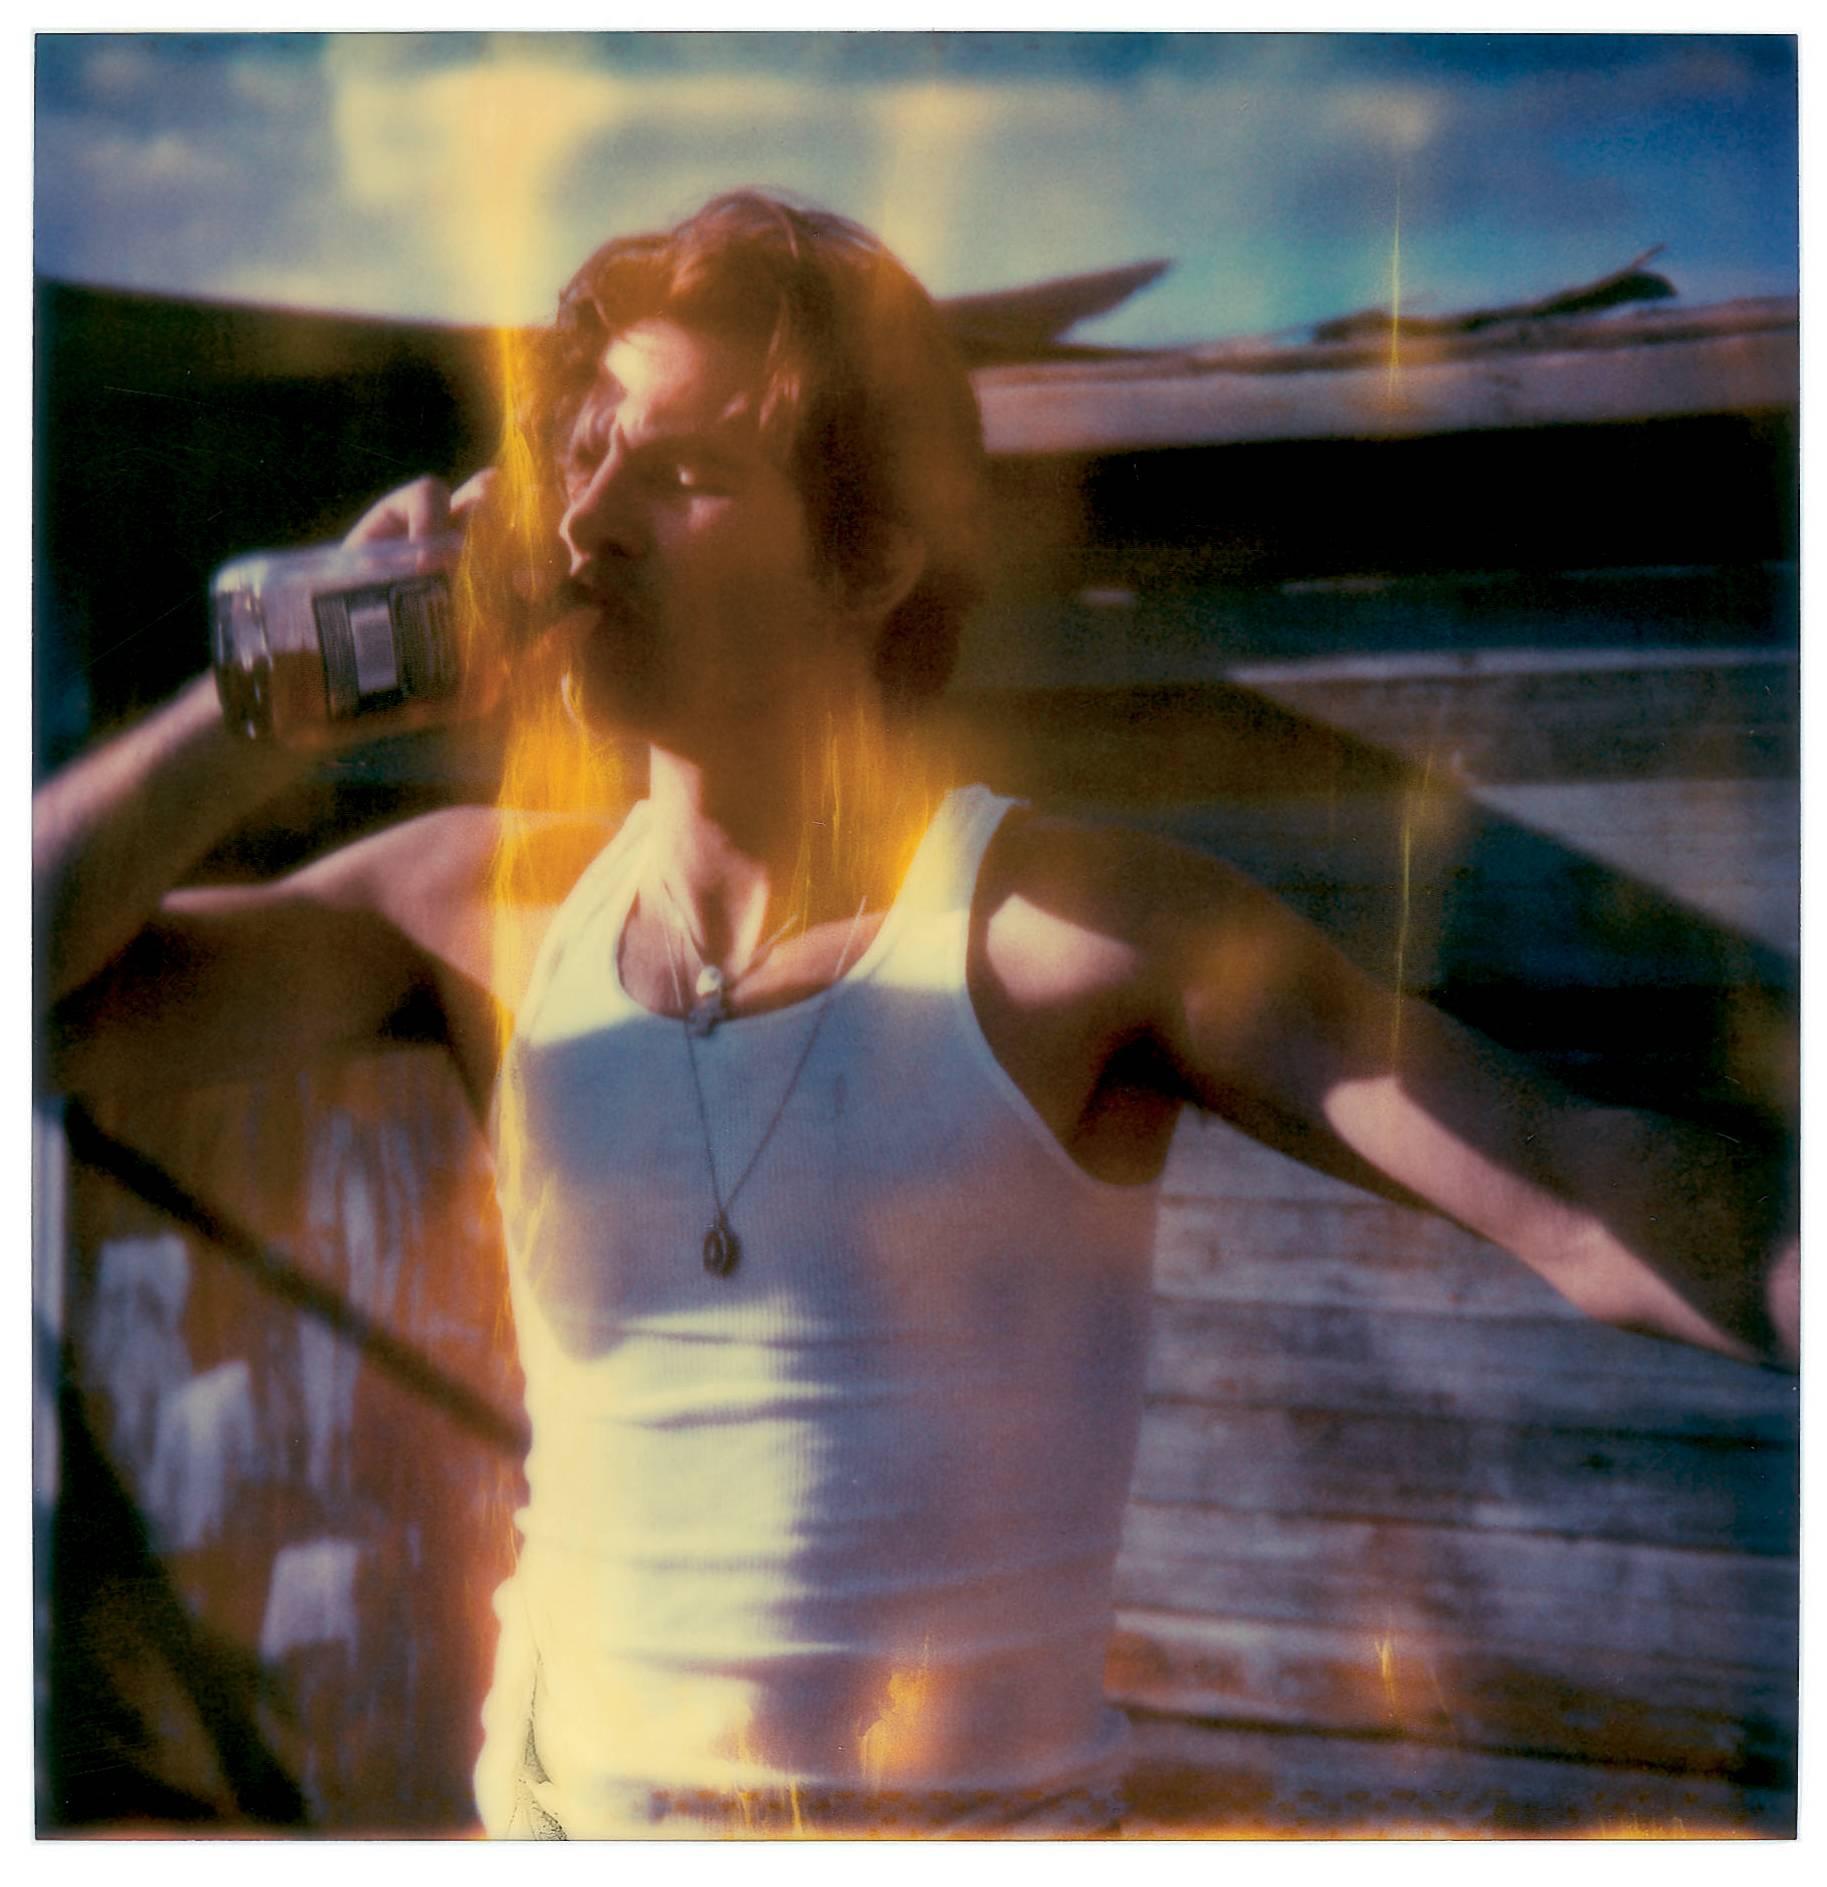 Whisky Dance (Sidewinder) - 2005 - 

Edition 2/5, 
8 pieces installed including gaps 172x338cm, 82x80cm.
8 analog C-Prints, hand-printed by the artist on Fuji Crystal Archive Paper, 
based on 8 Polaroids. 
Mounted on Aluminum with matte